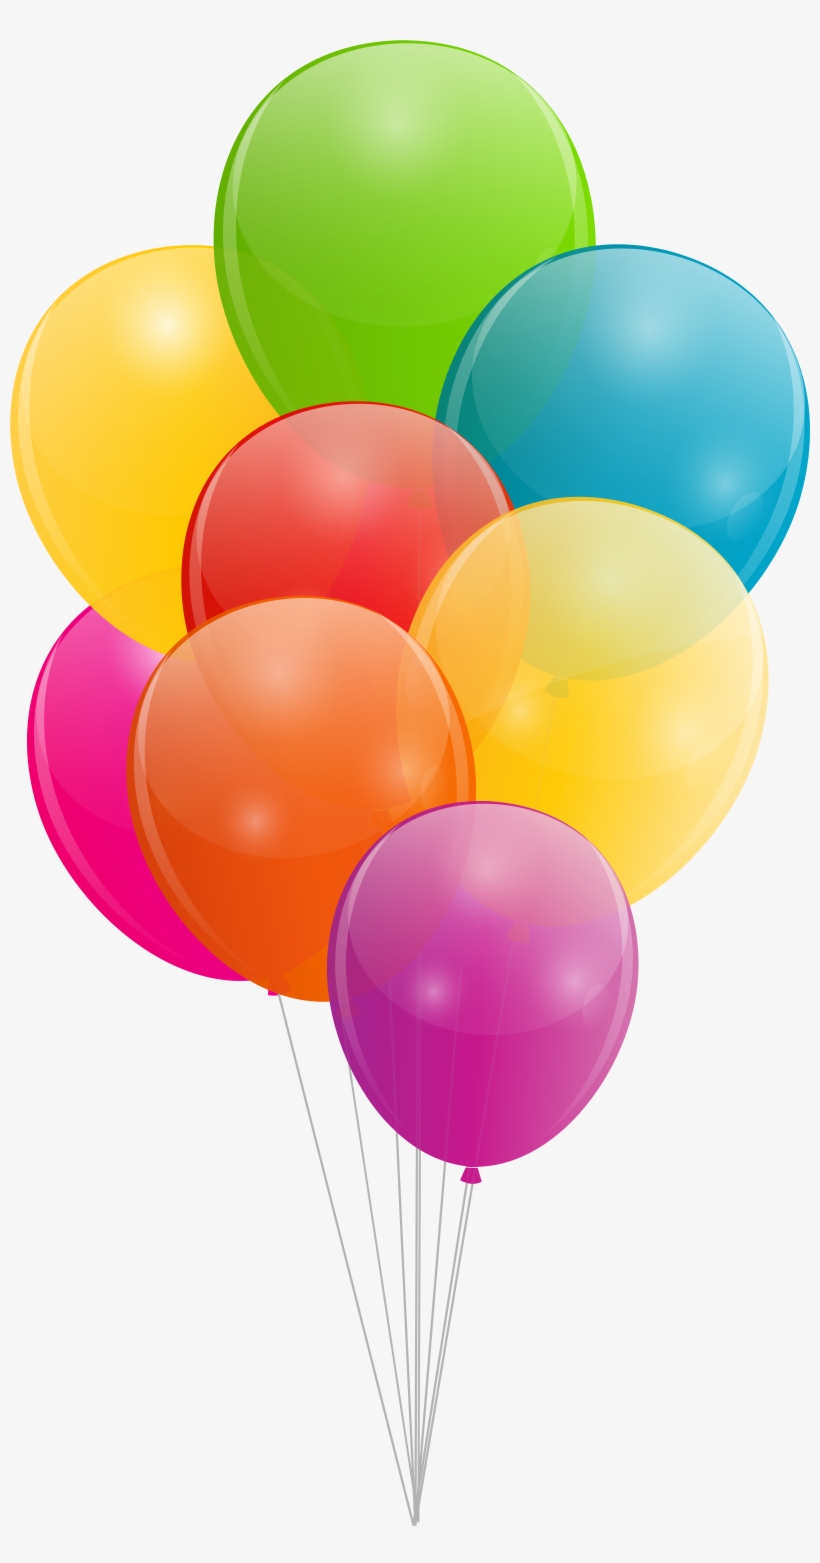 Balloons Png Clip Art - Free Transparent PNG Download - PNGkey